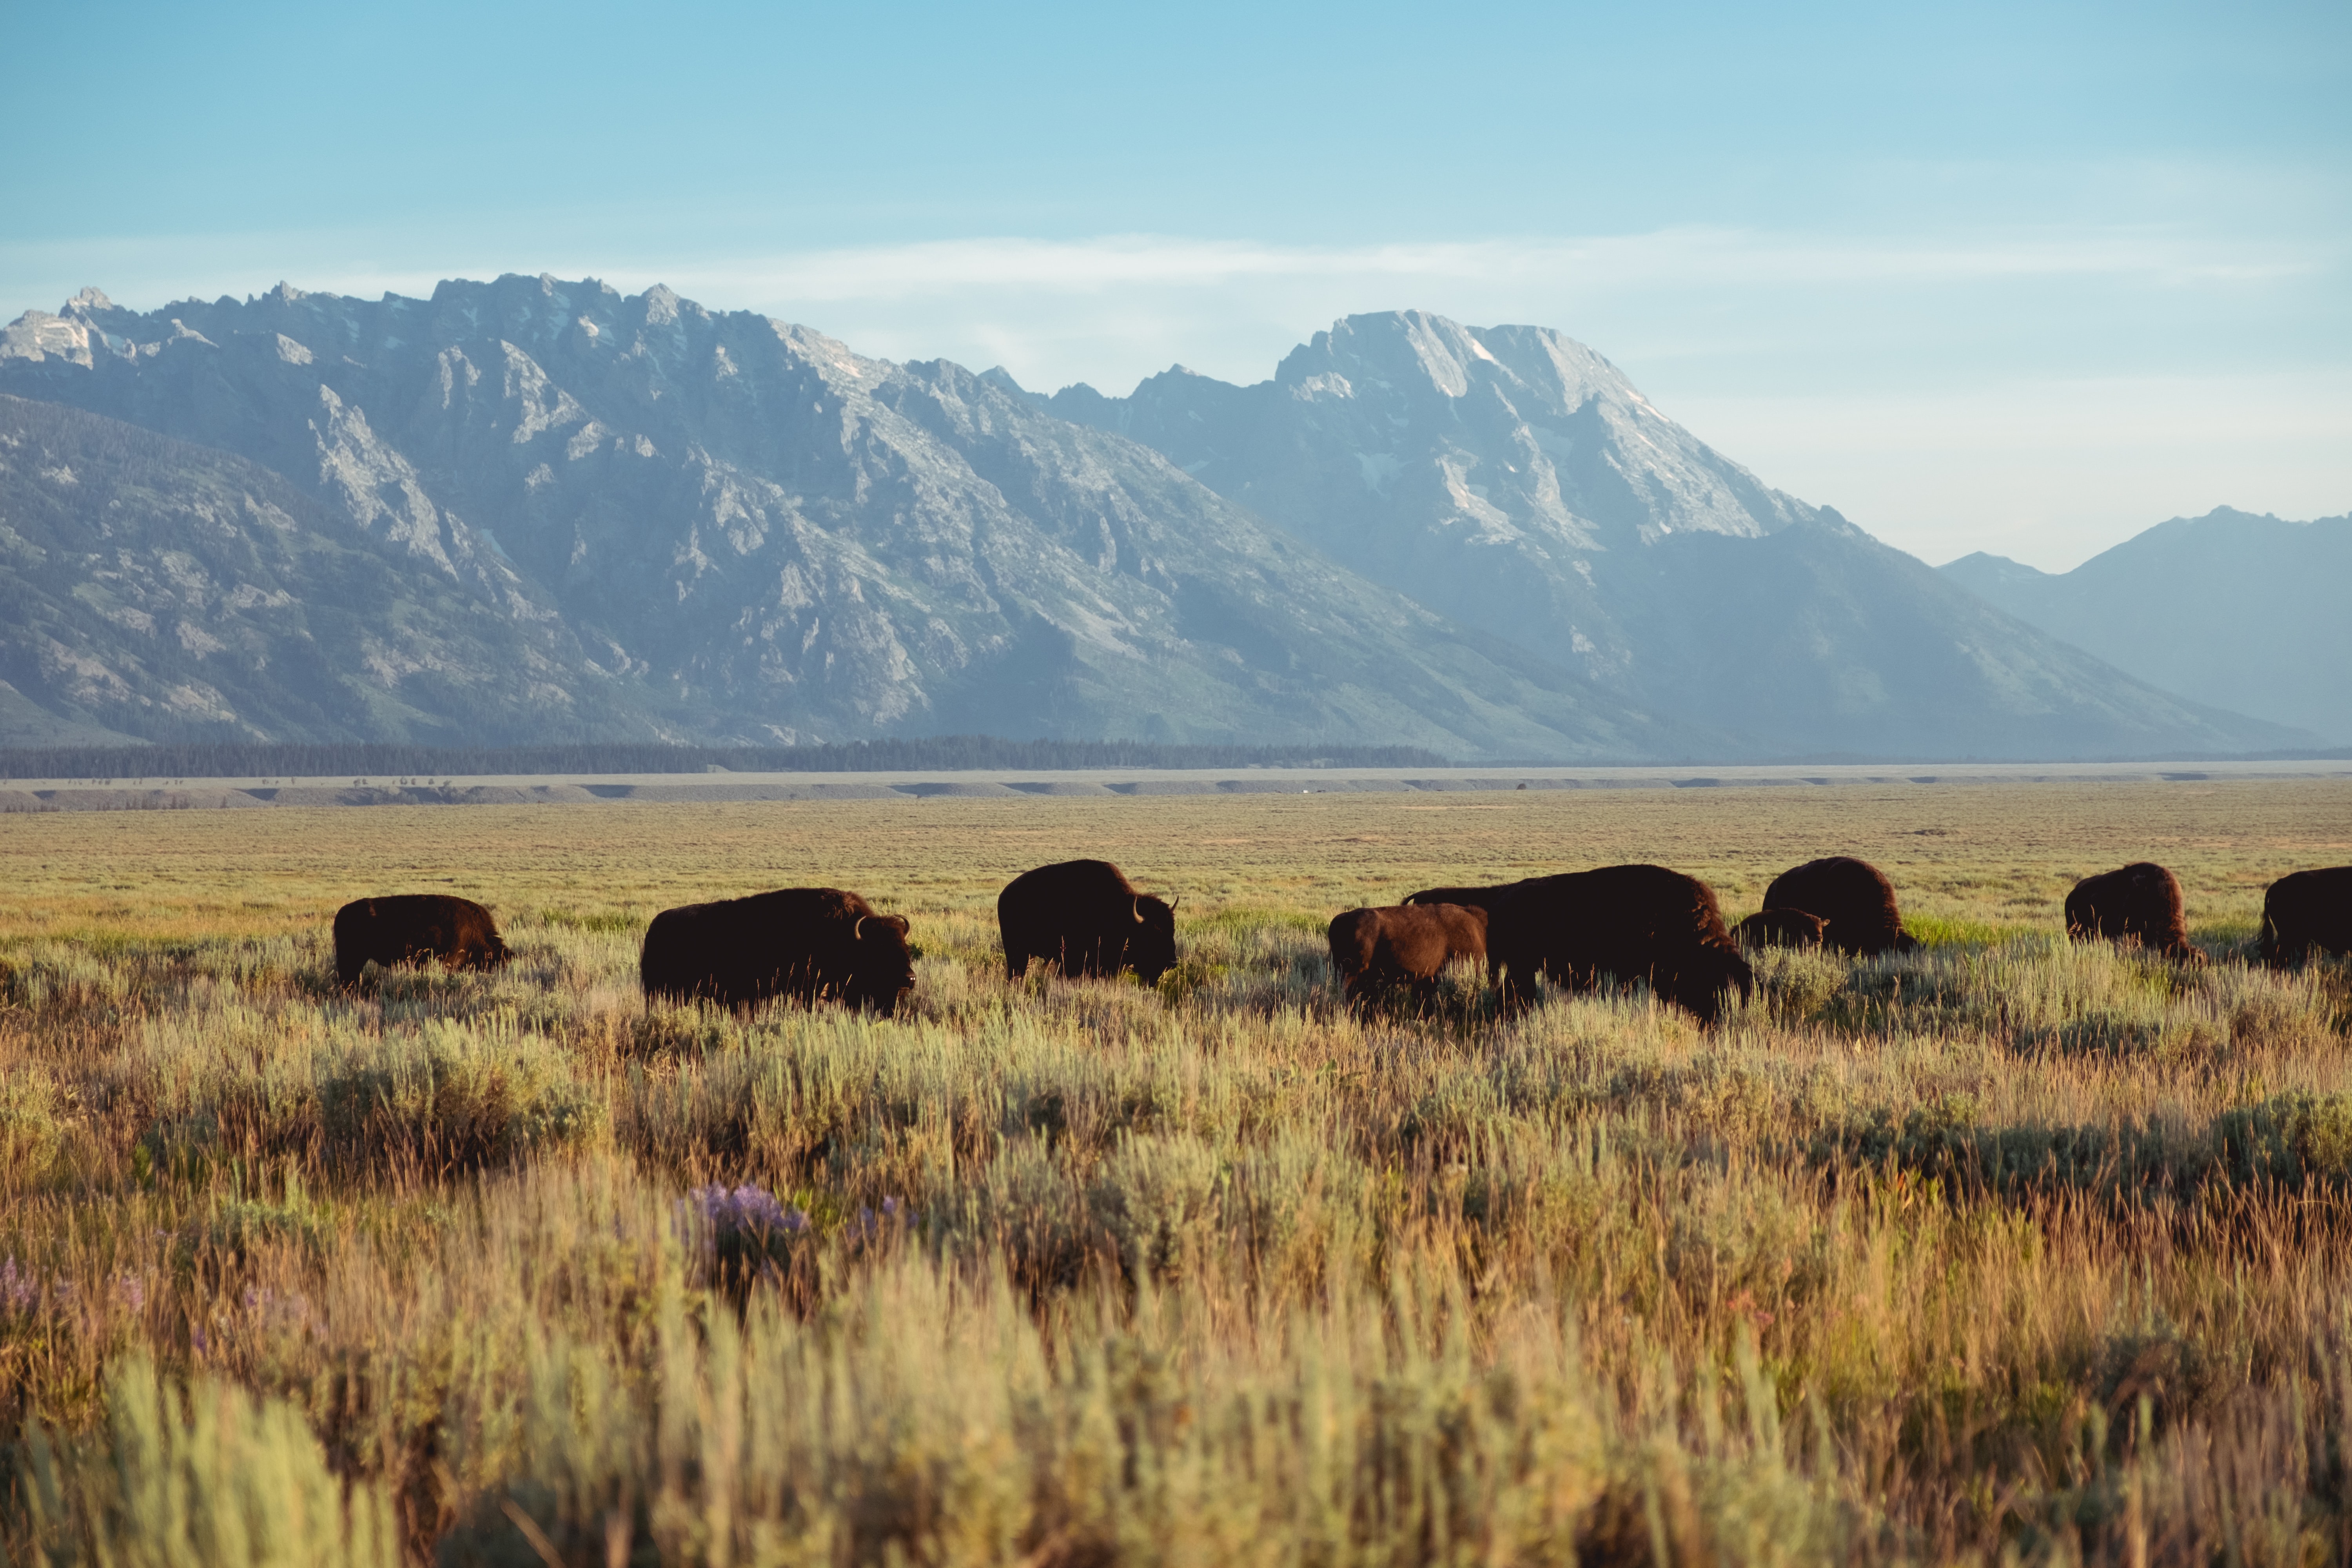 Herd of bison graze in a field in front of mountains in Grand Teton National Park.